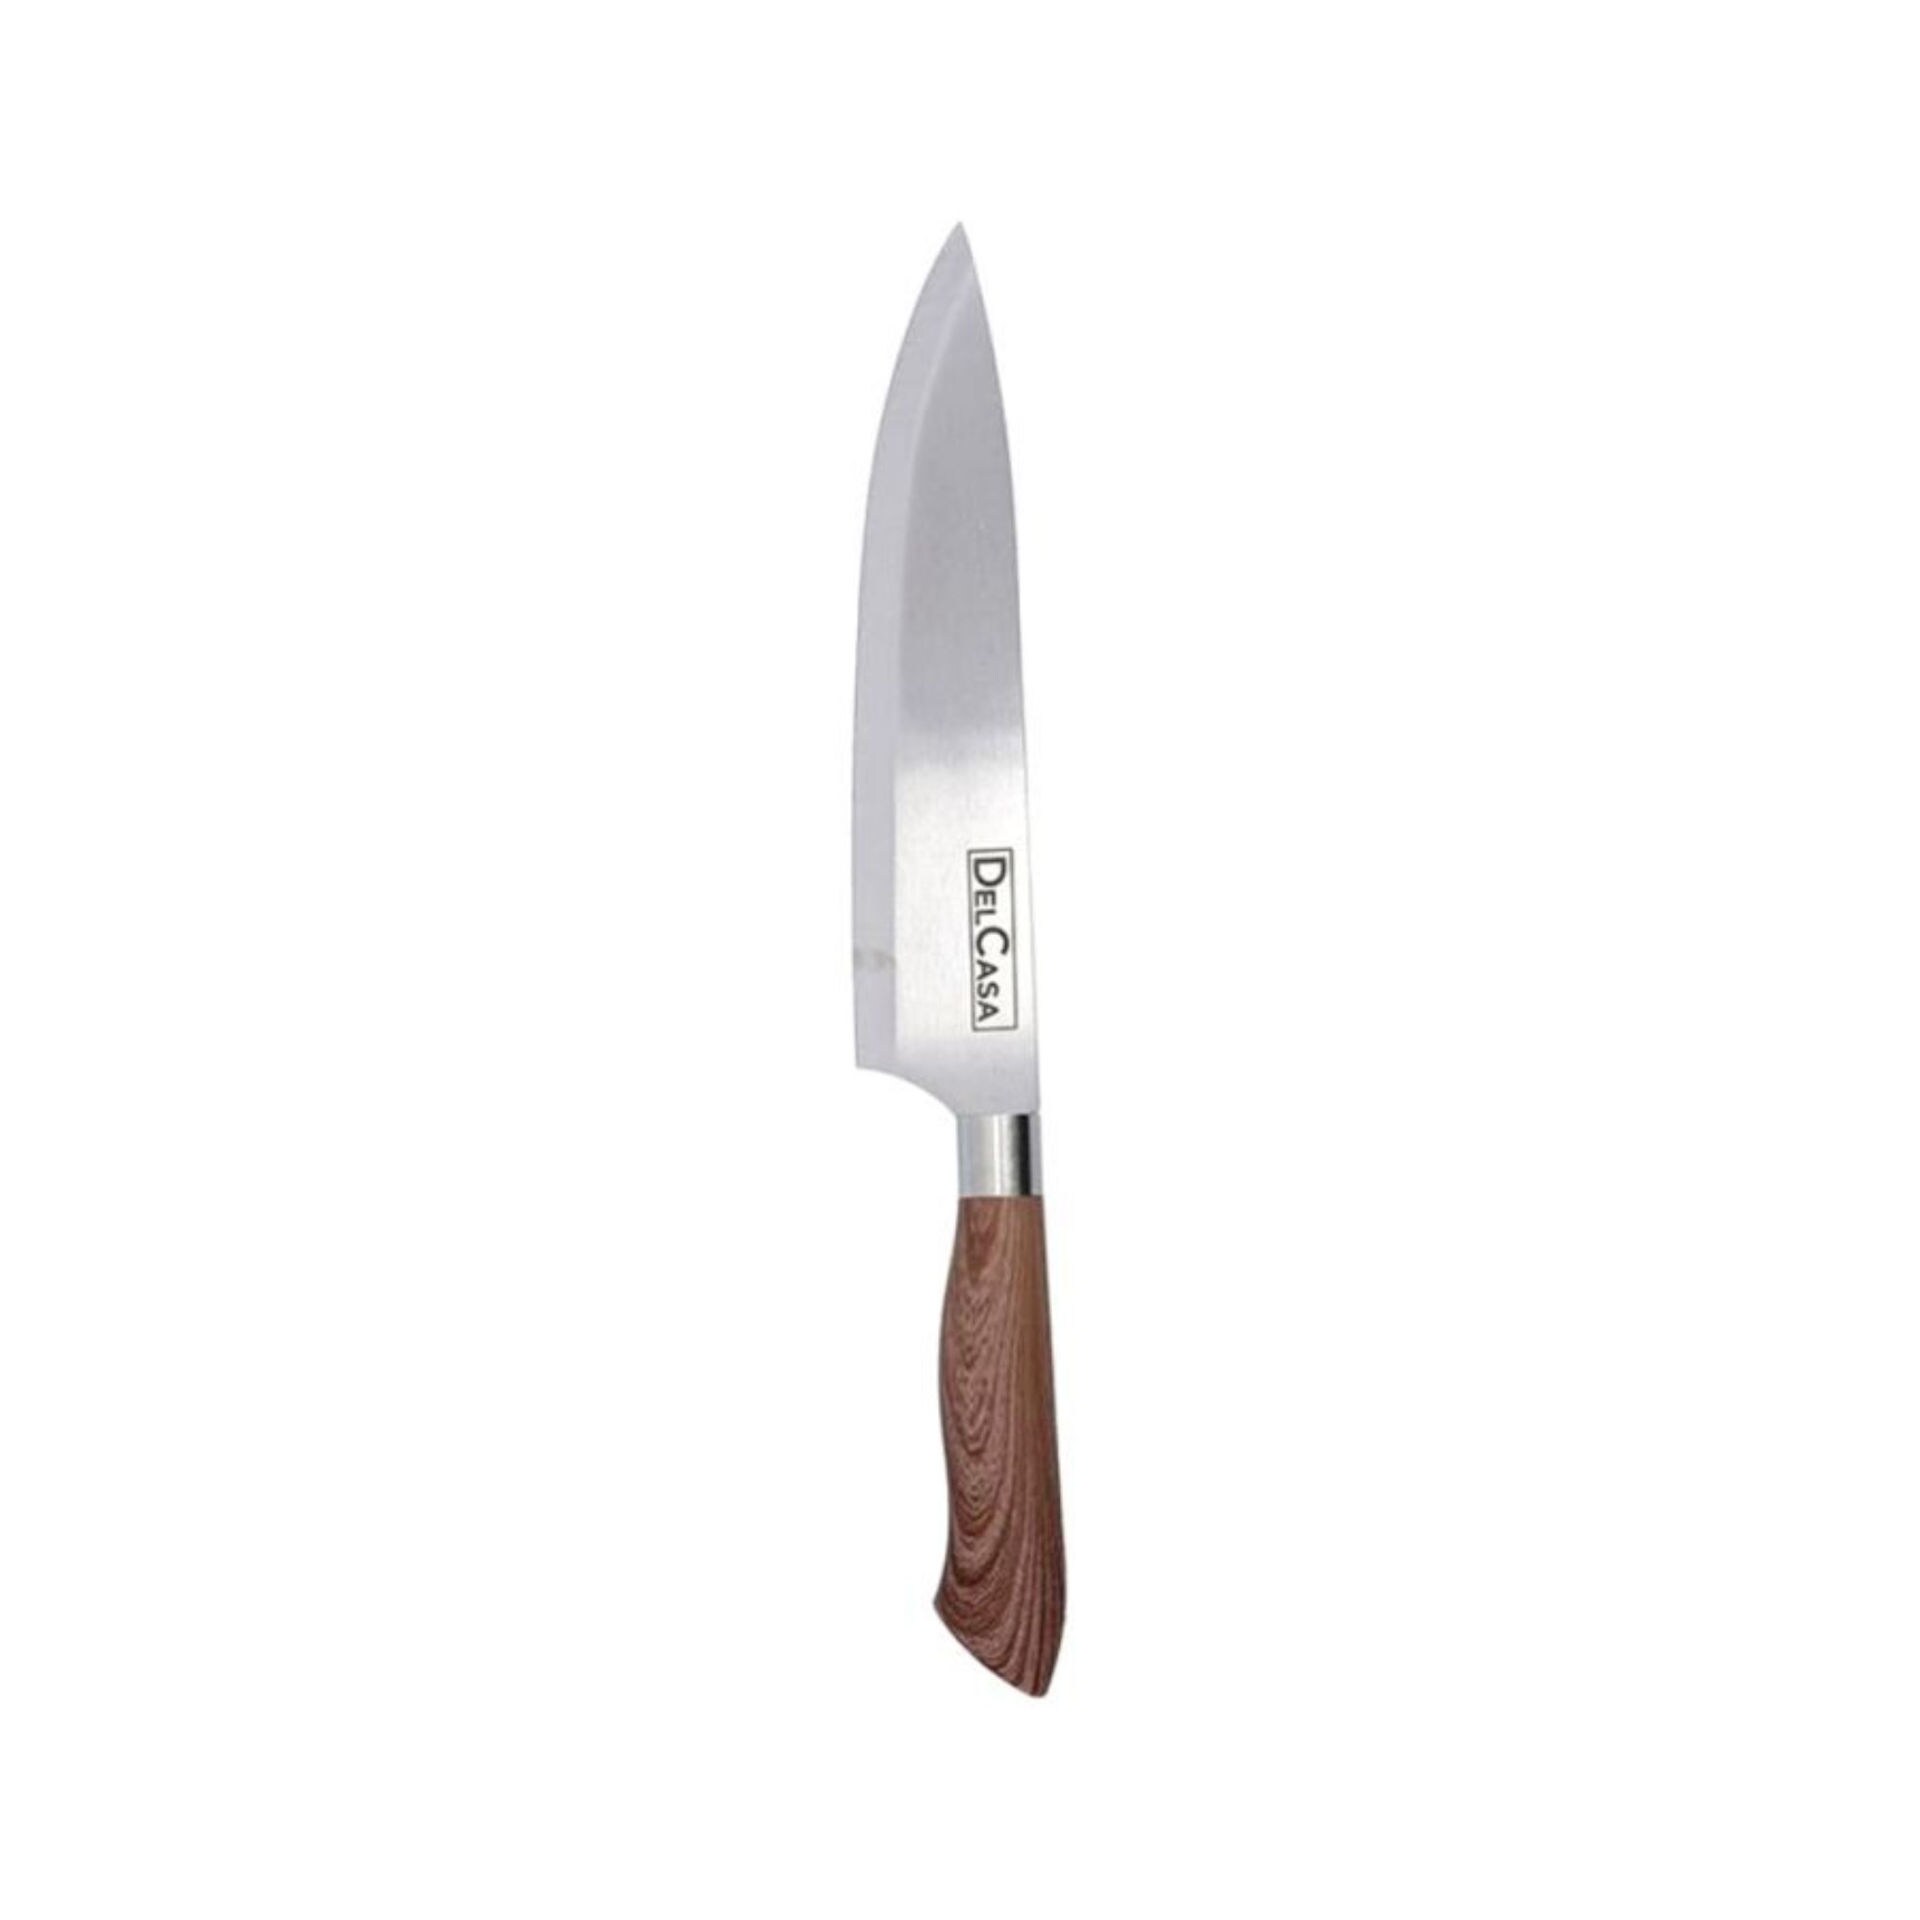 https://assets.dragonmart.ae//pictures/0457112_delcasa-stainless-steel-chef-knife-8inch-silver-and-brown.jpeg